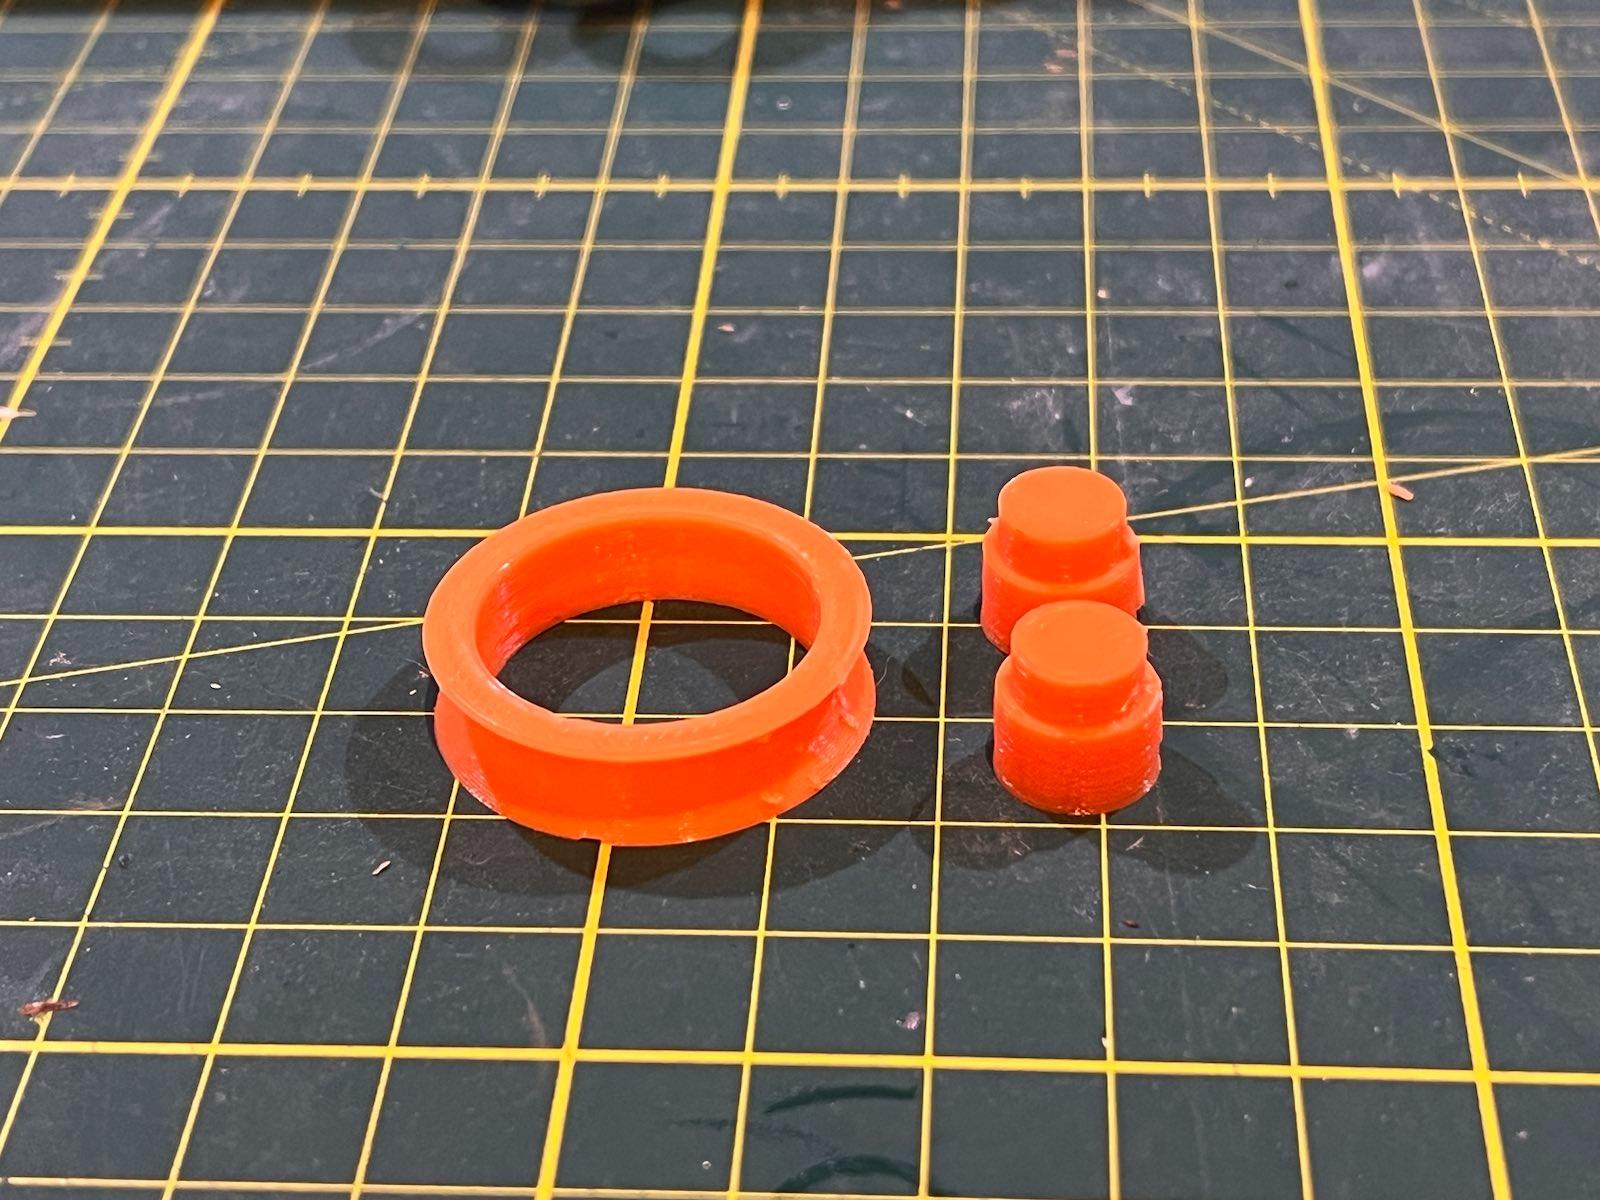 608zz_Ball_Bearing_Filament_Rollers_Filament Spool Rollers v3_Outer-Housing_1_Body1.stl 3d model